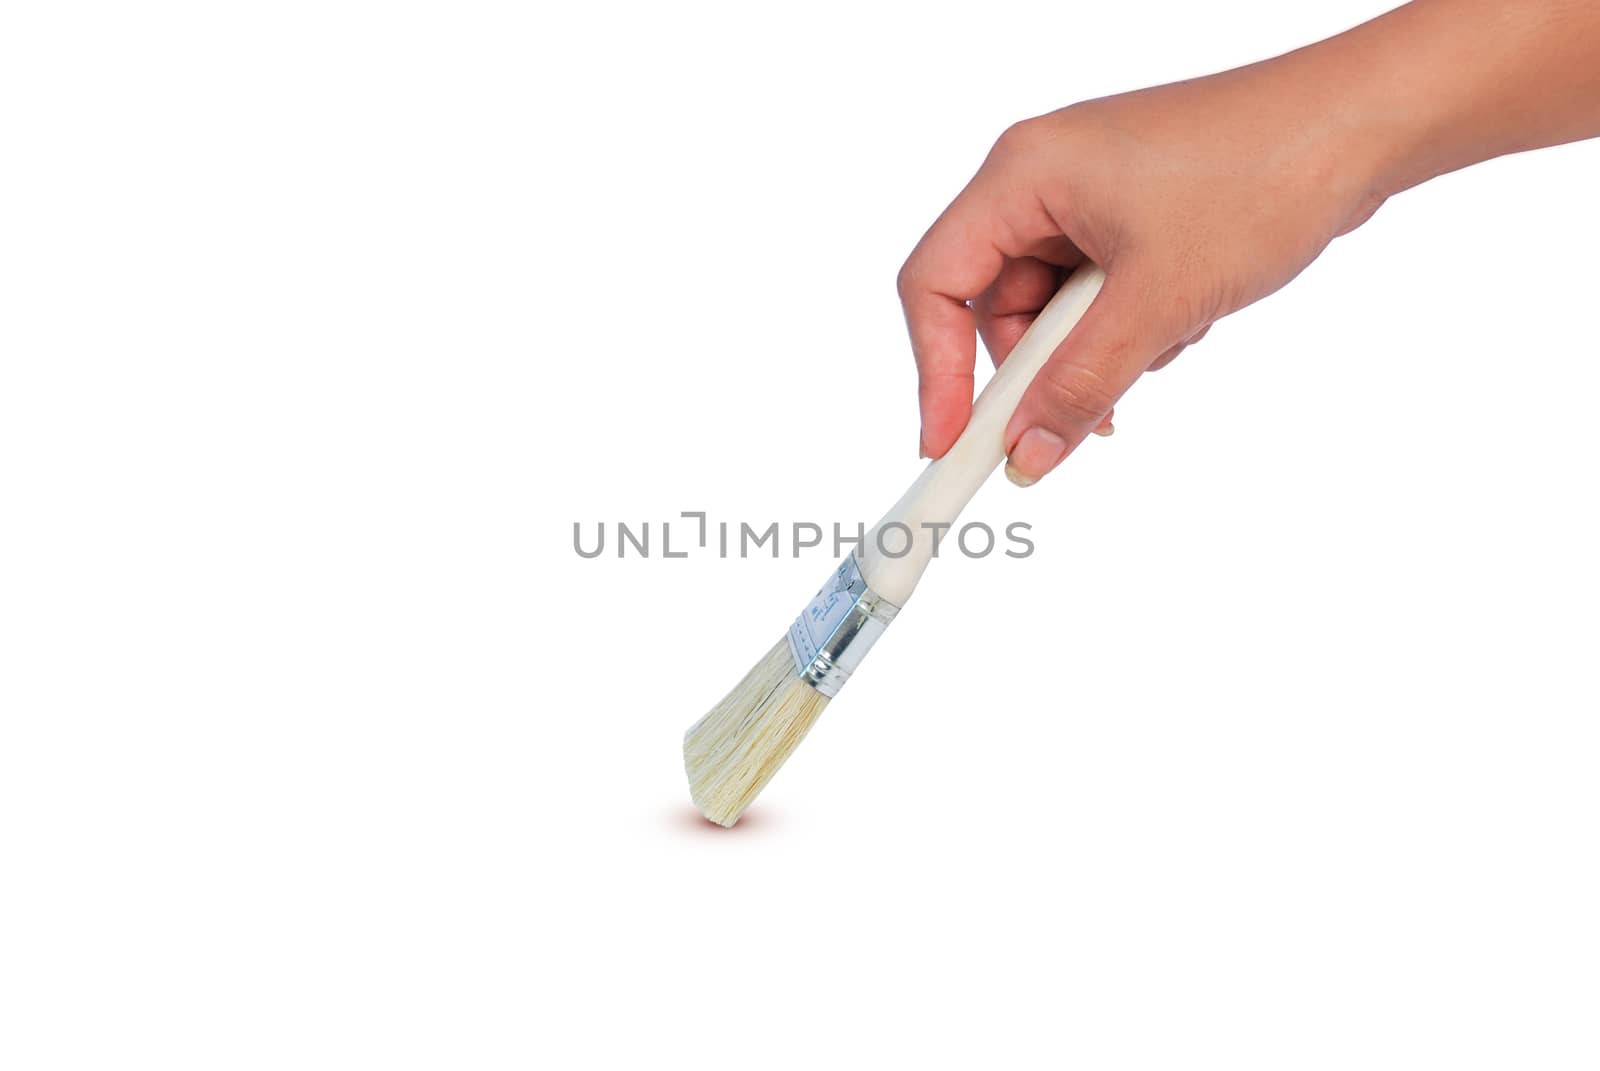 Paint brush, white wooden handle, size 1.5 inch.on white background.With Clipping Path.